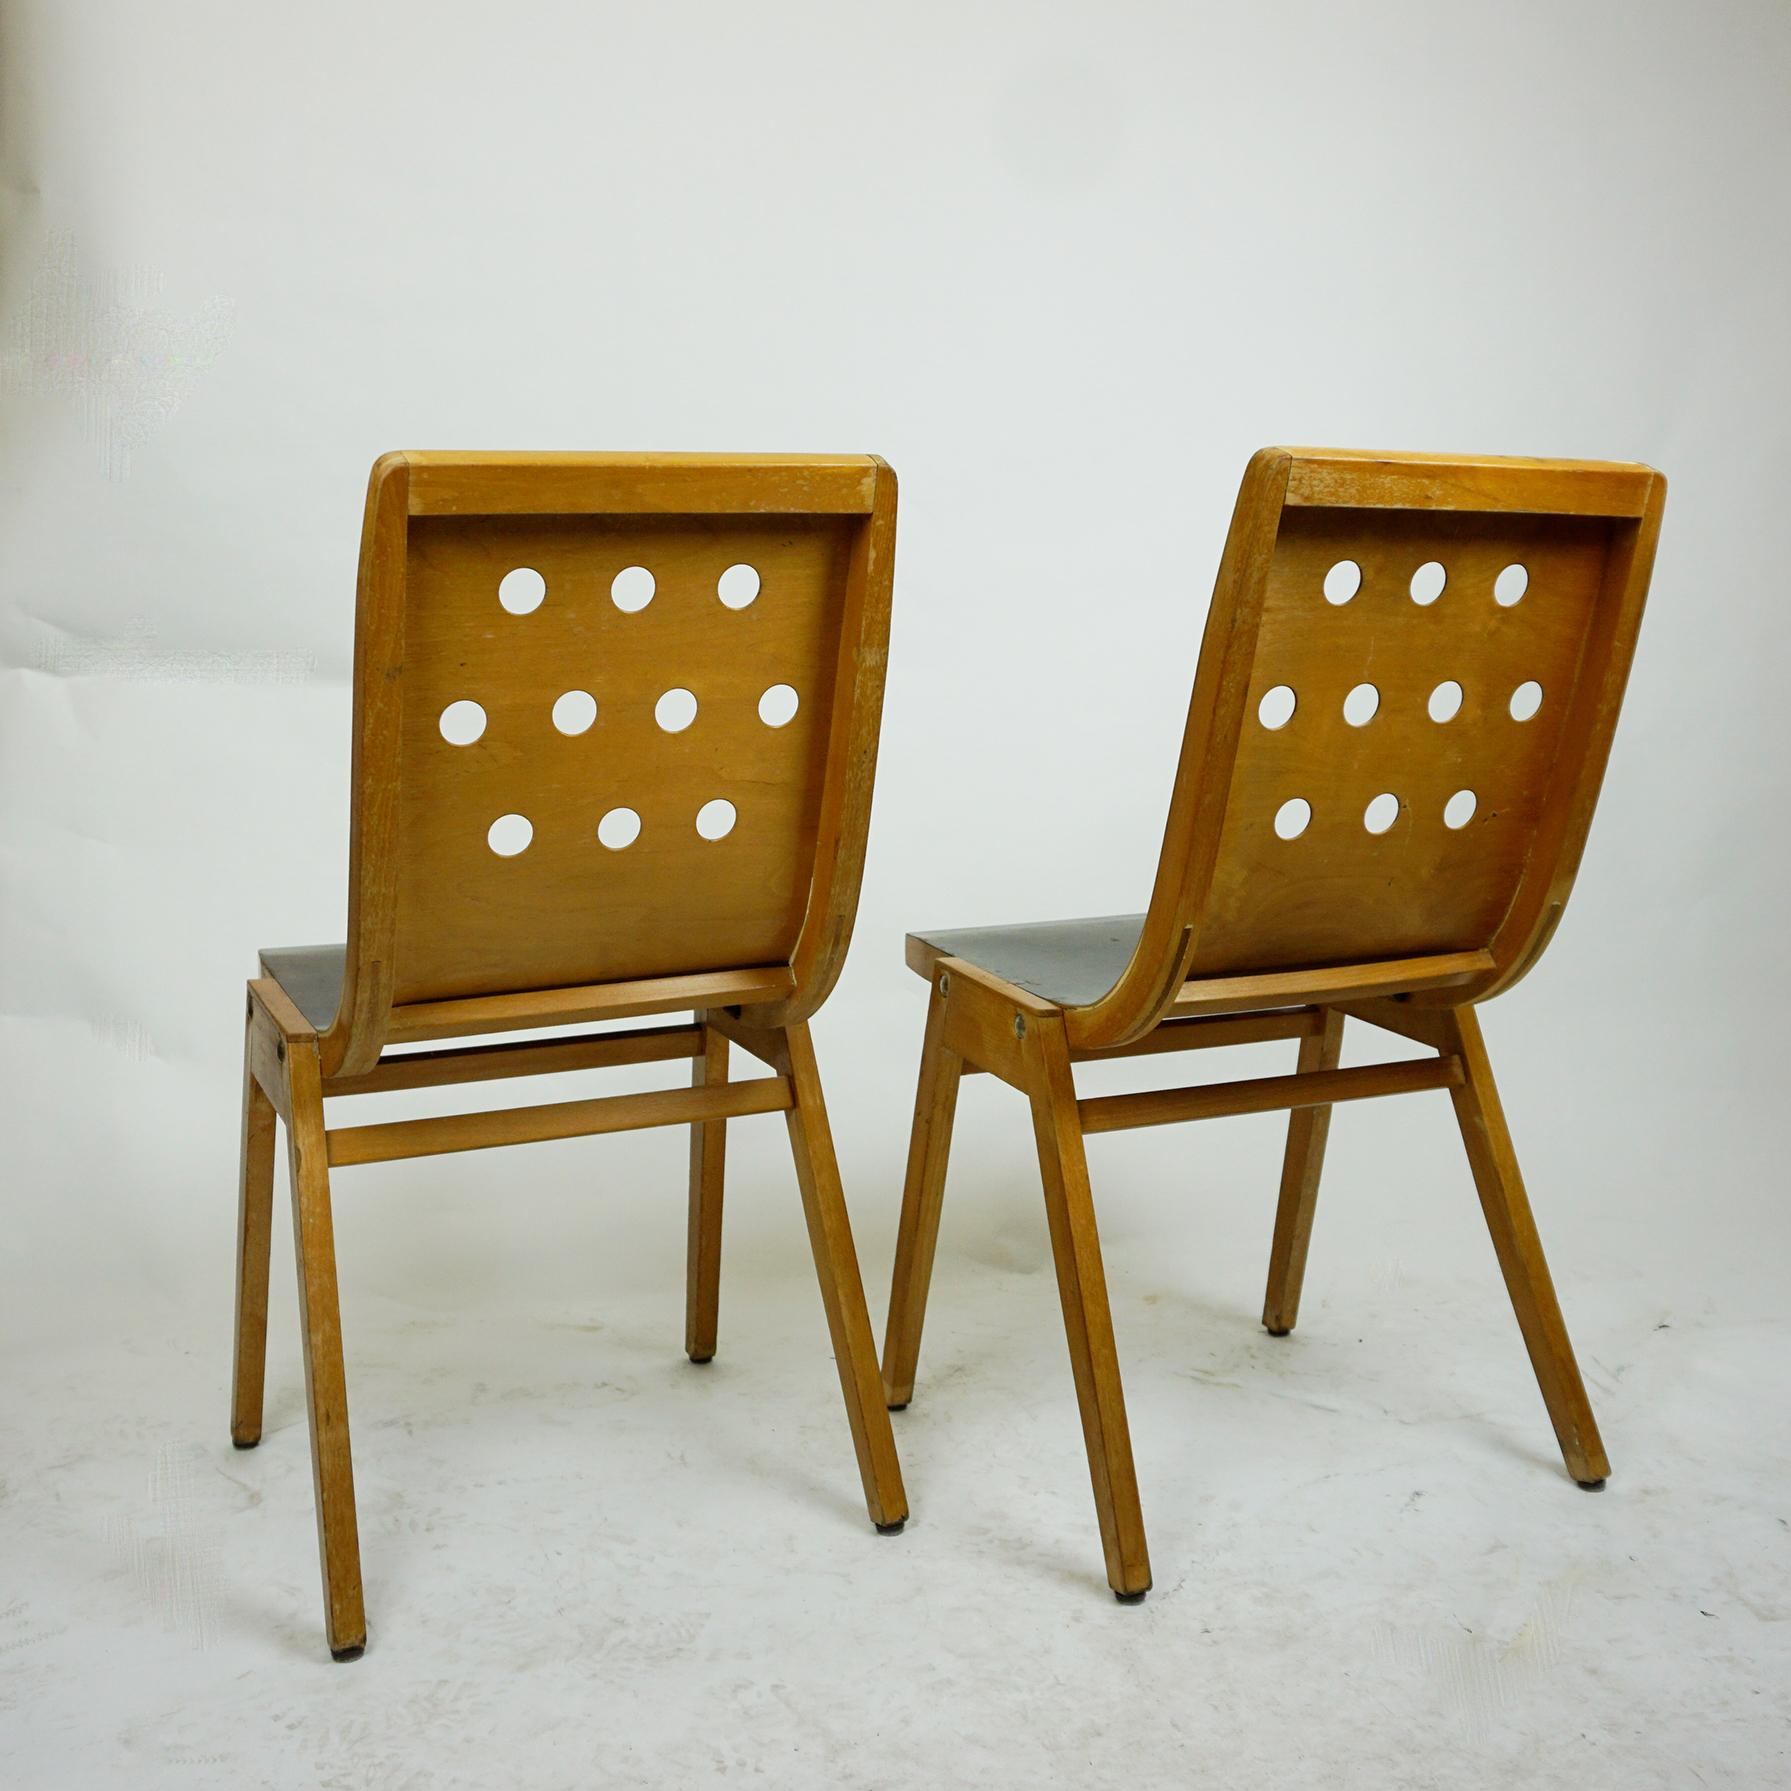 20th Century Set of Two Austrian Midcentury Beech Stacking Chairs by Roland Rainer